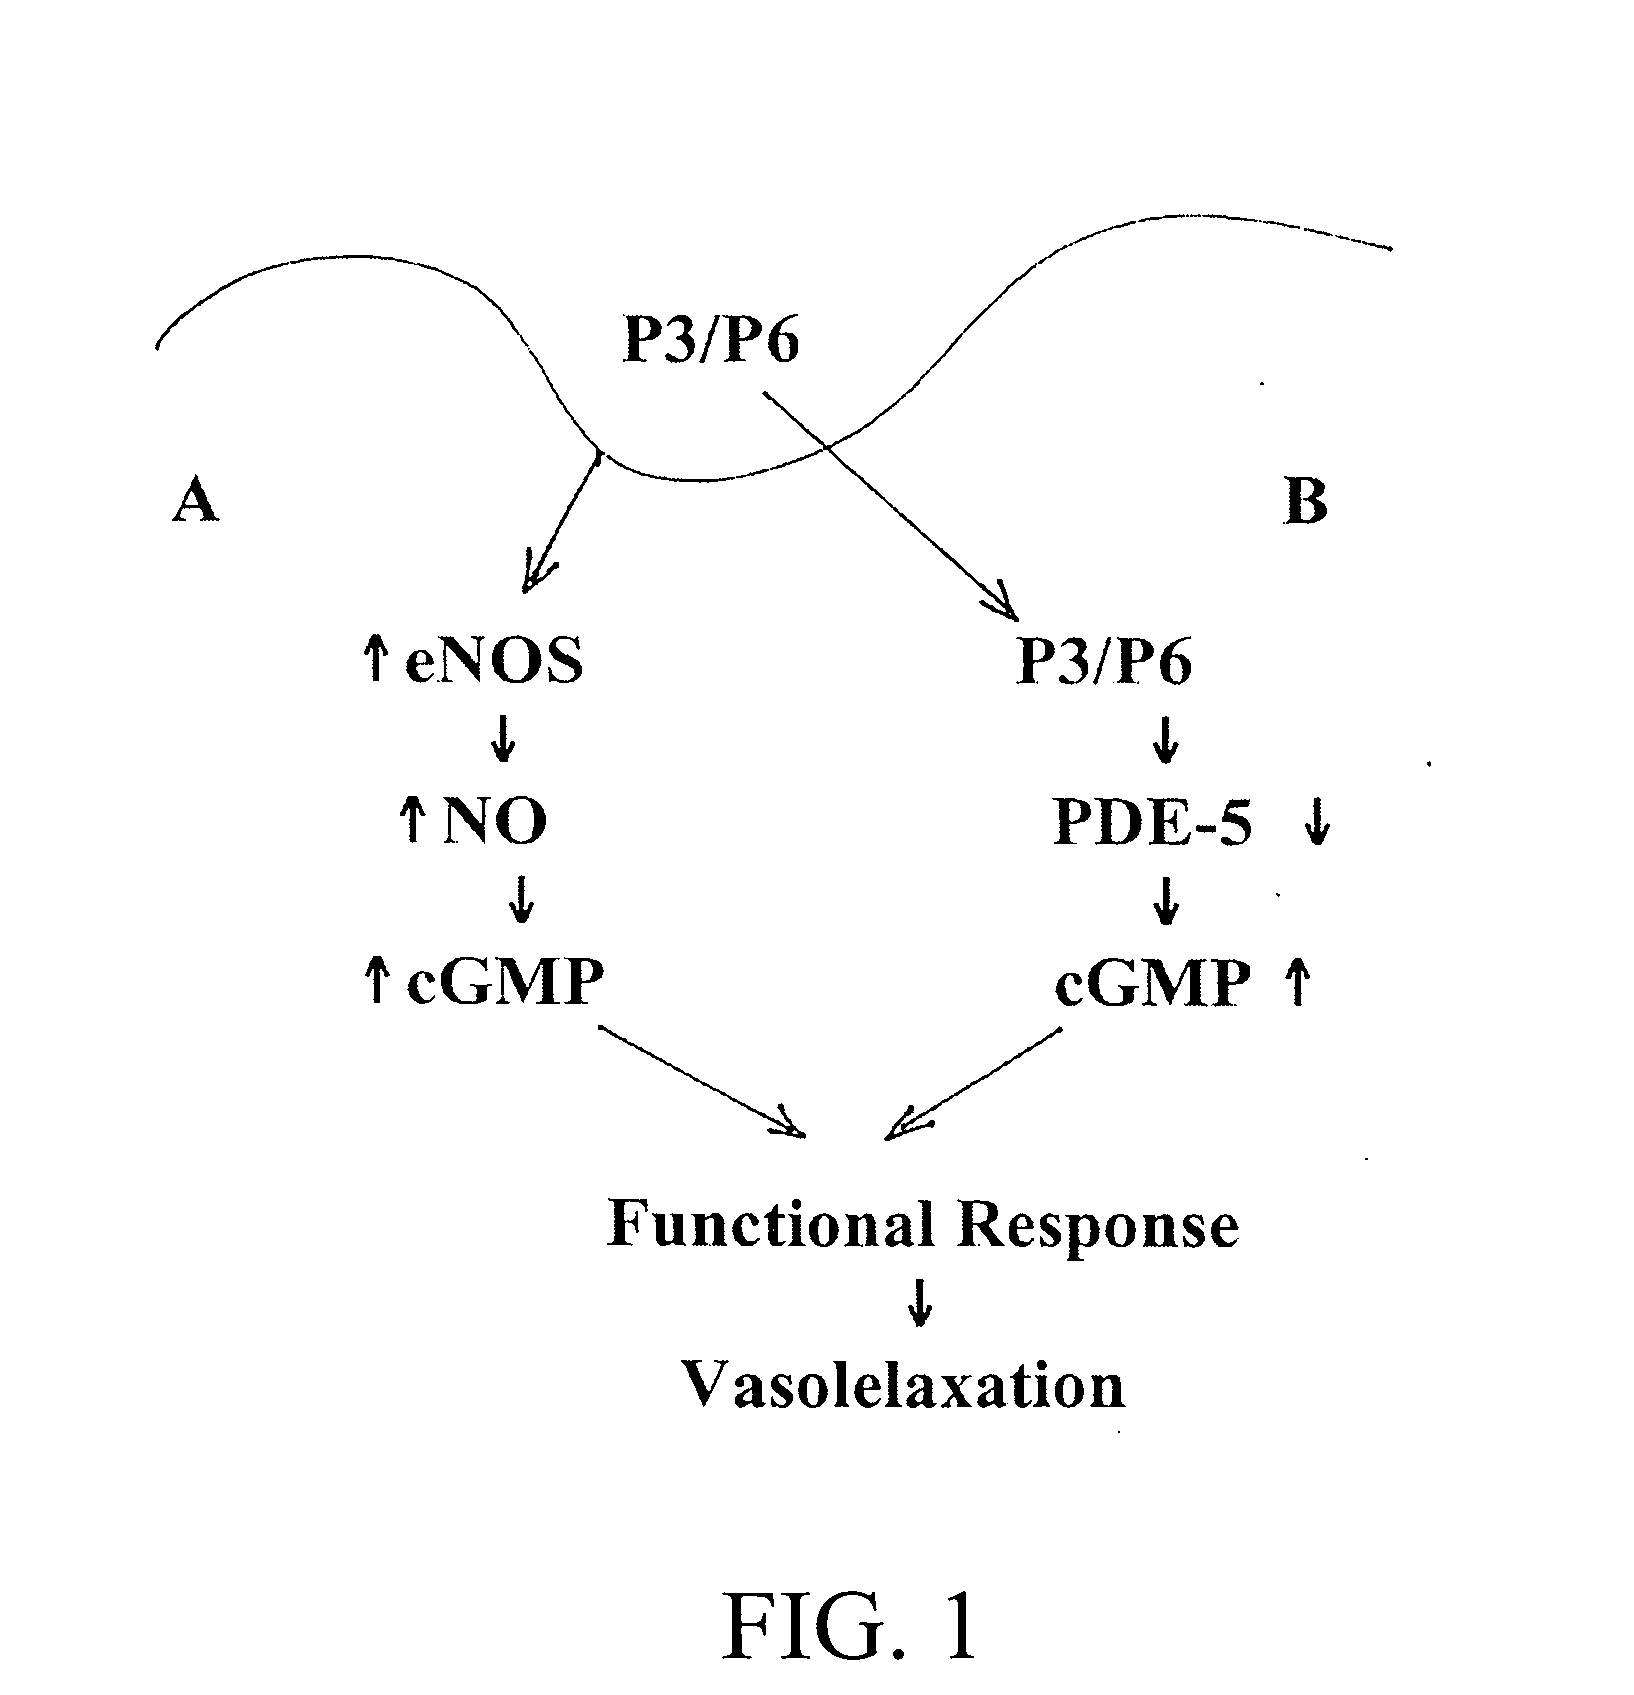 Materials and methods for regulating blood flow